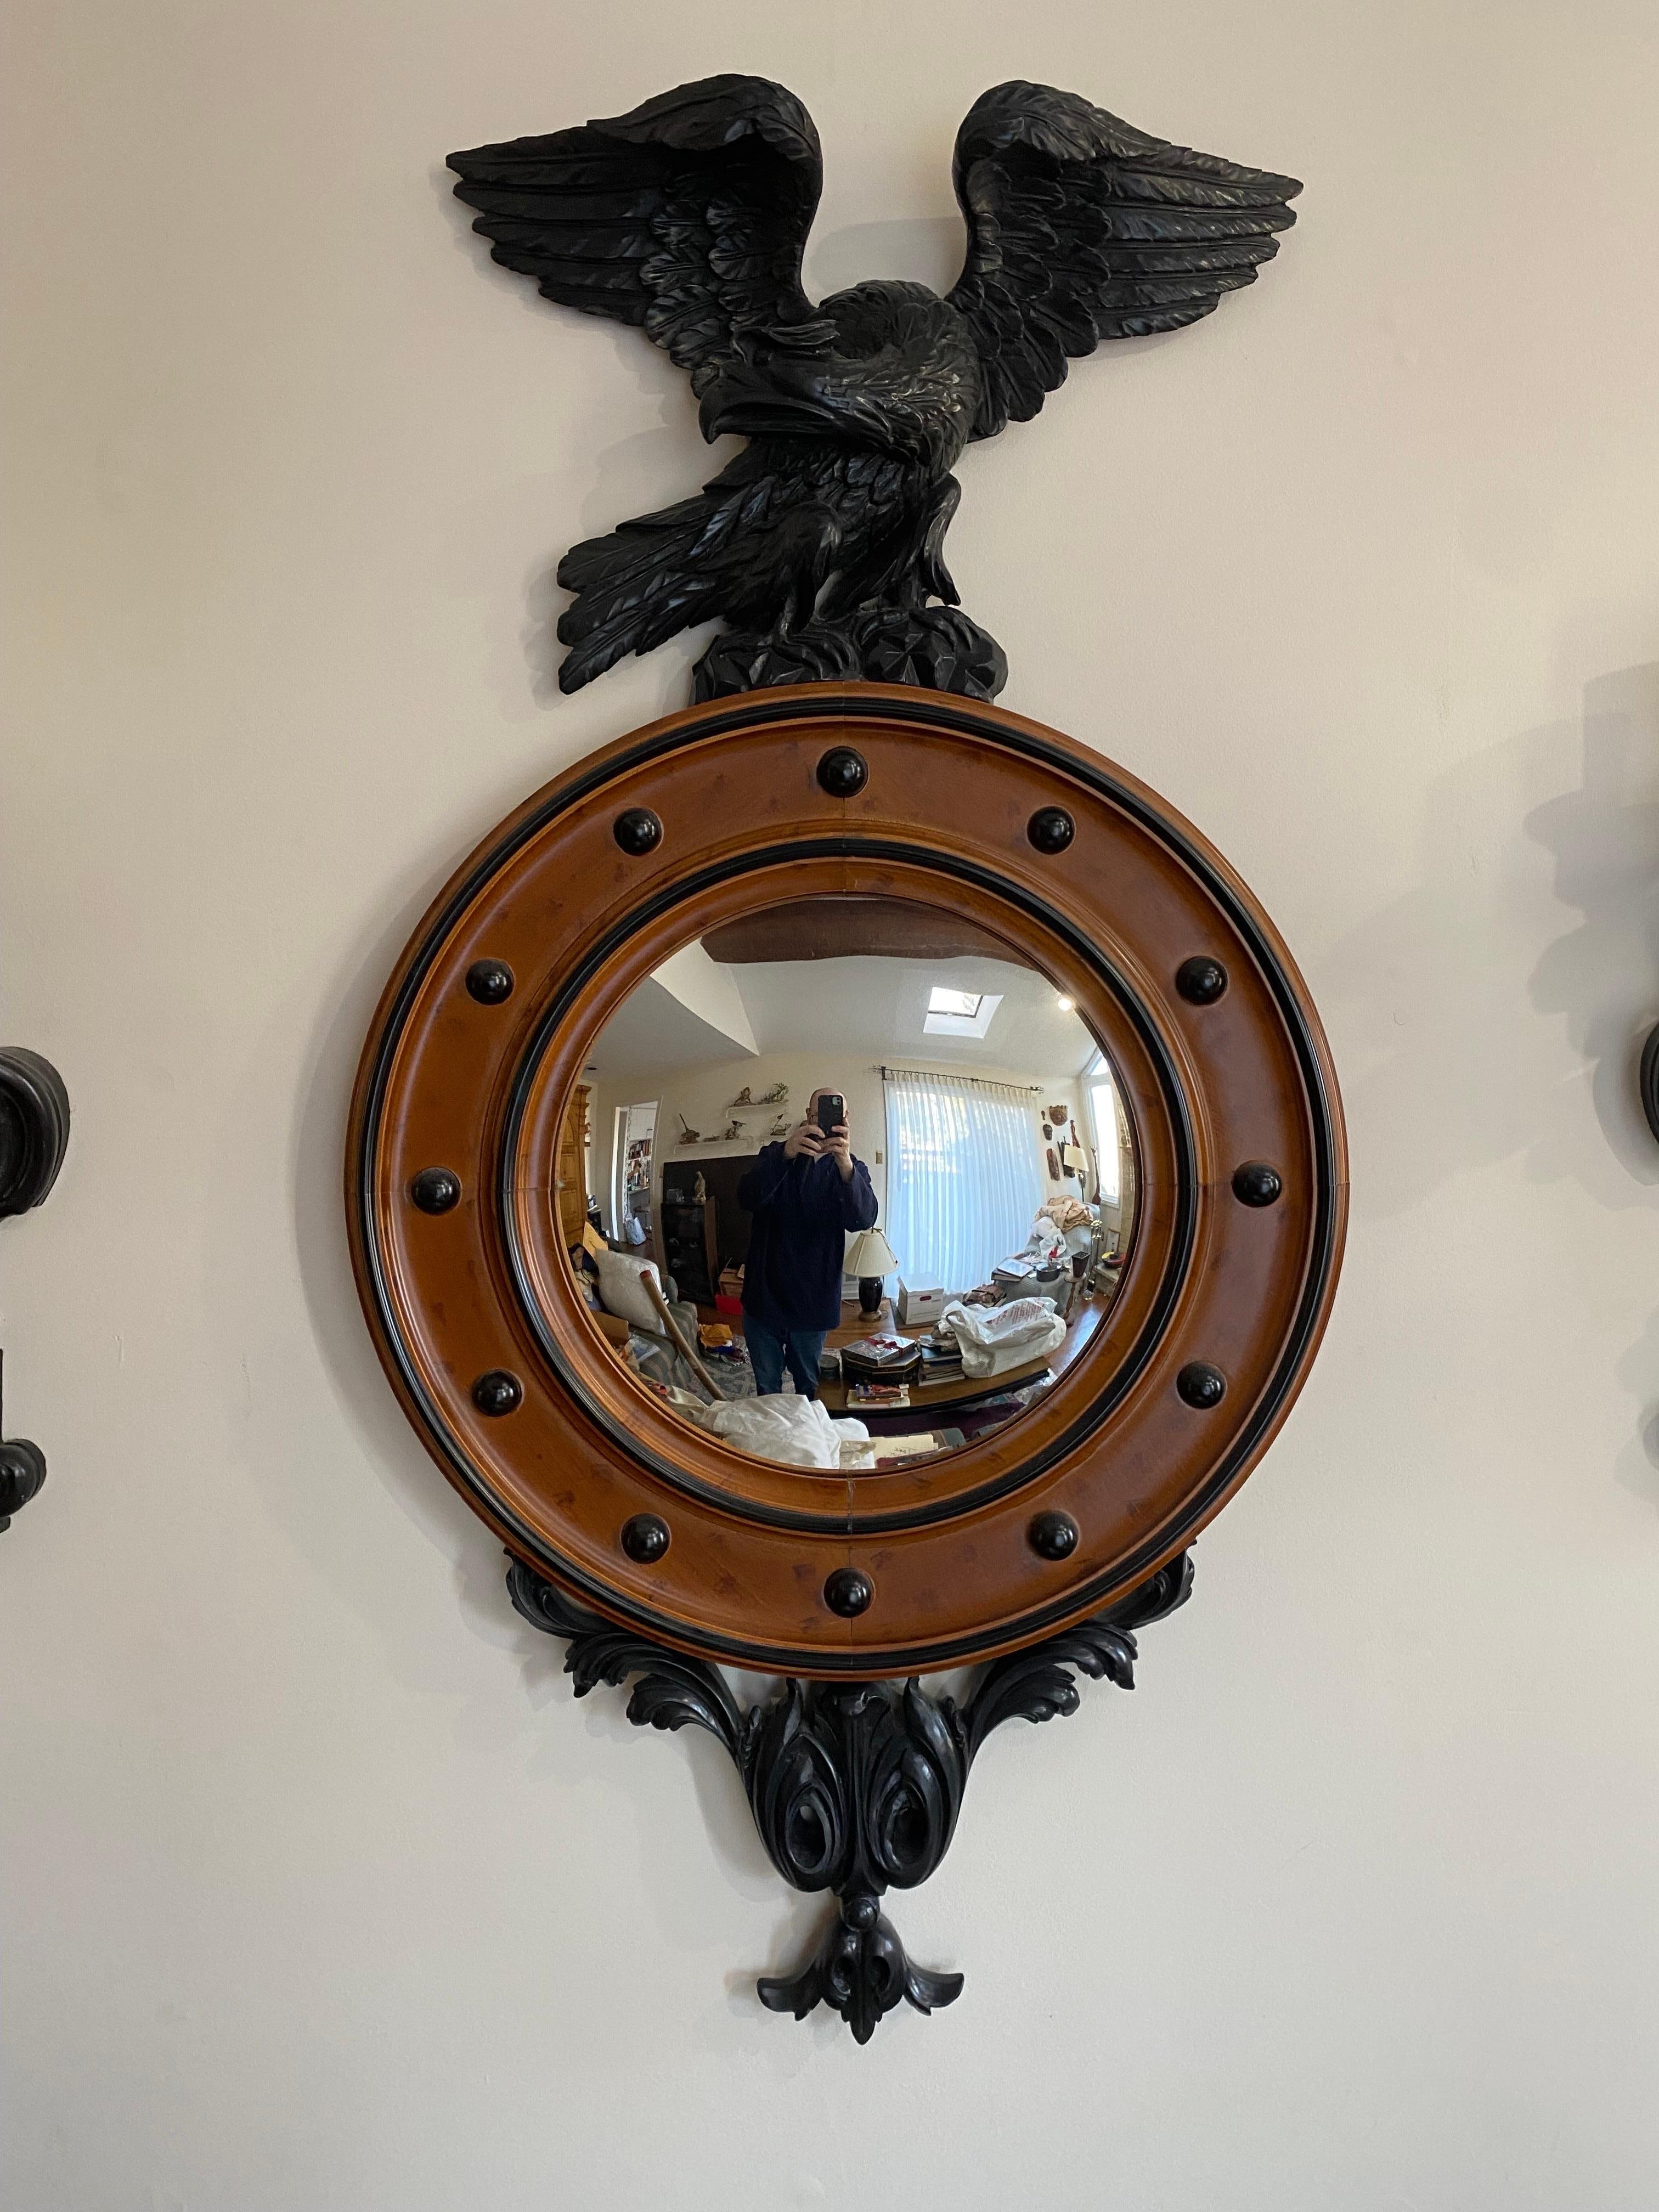 A large Regency style mirror with birds eye maple round frame and domed glass central mirror. Topped with a large hand cast black resin eagle and accented on the bottom with matching scroll work ornament. Weight is a substantial 70 pounds. 25.5”